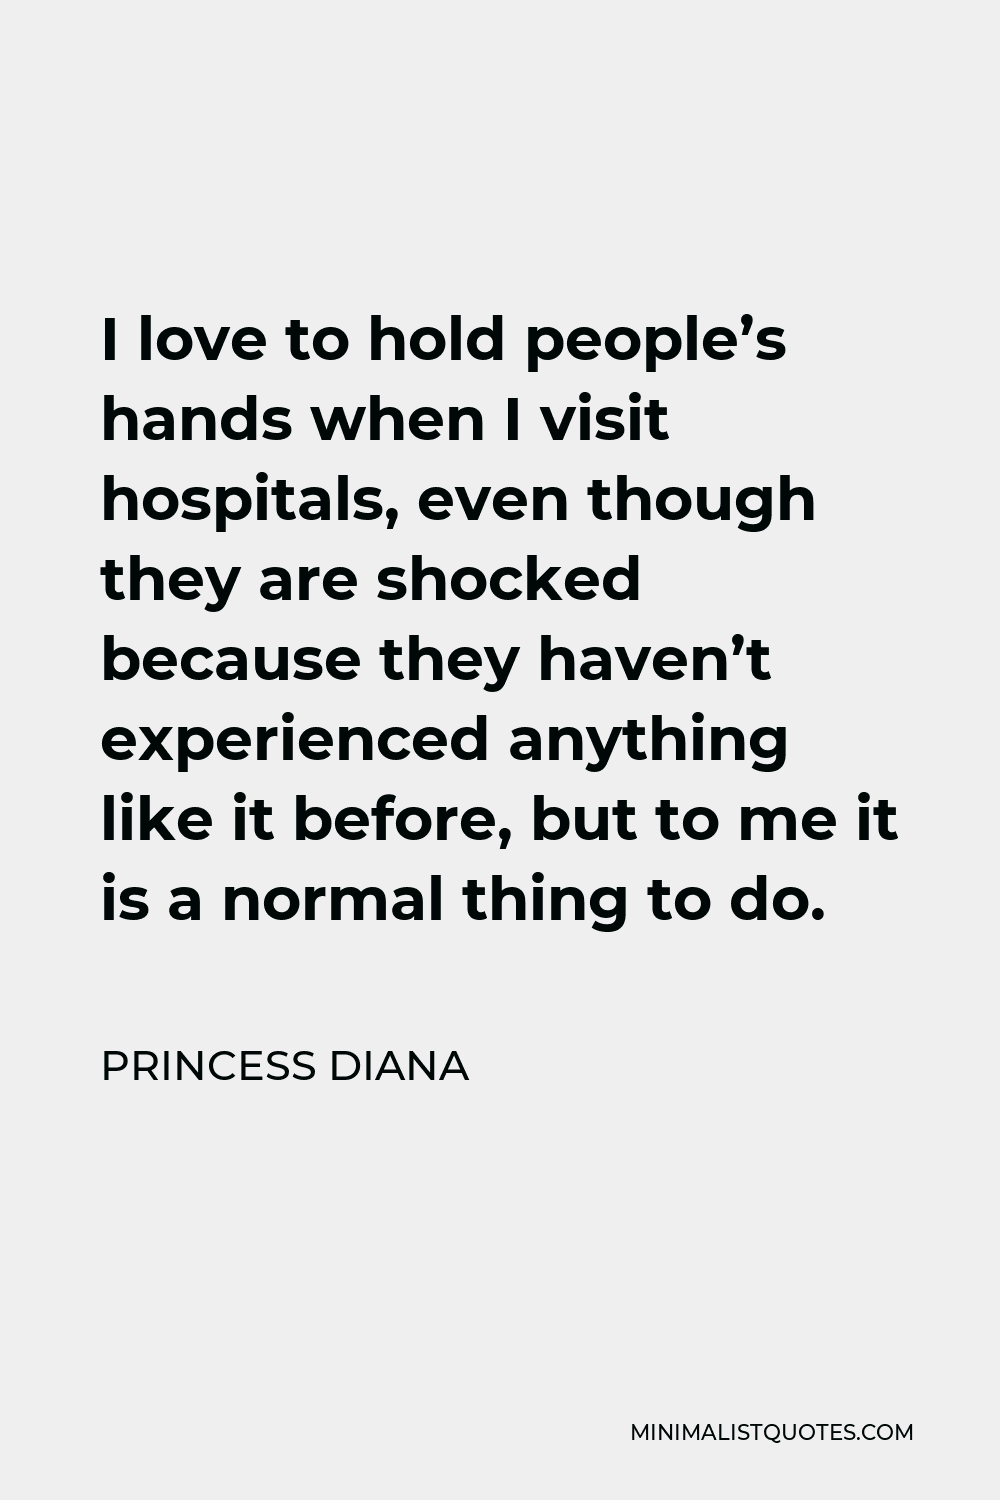 Princess Diana Quote - I love to hold people’s hands when I visit hospitals, even though they are shocked because they haven’t experienced anything like it before, but to me it is a normal thing to do.